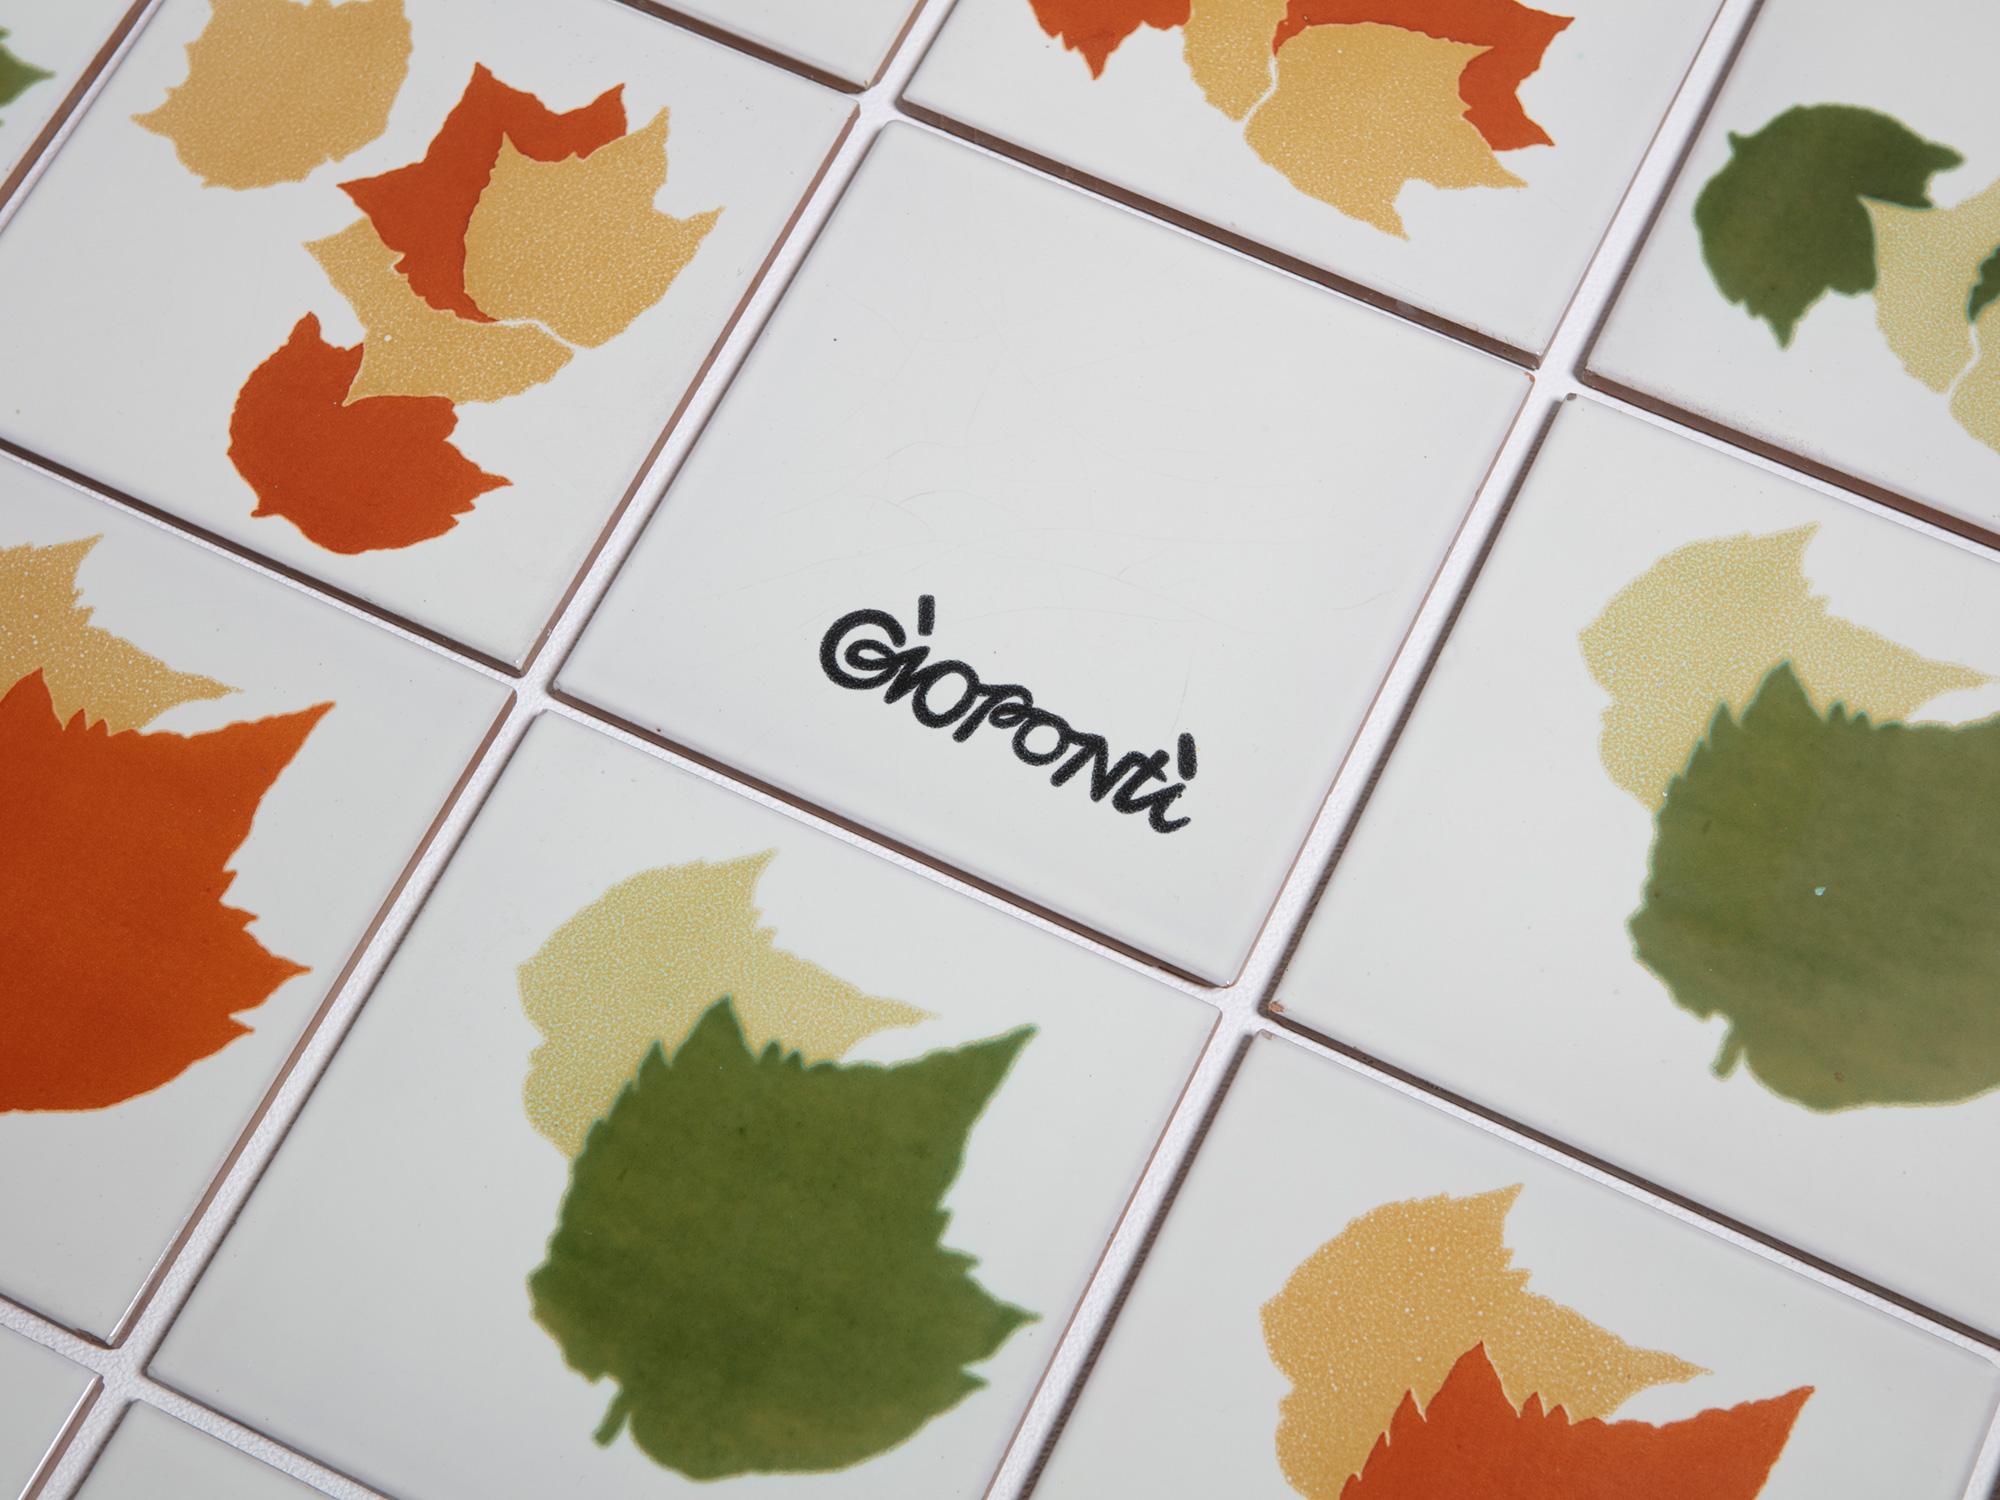 Rare set of ceramic tiles by Gio Ponti for Ceramica D'Agostino.
A bunch of leaves with different size and autumn and spring colors.
80 colored pieces can be combined with additional white tiles.